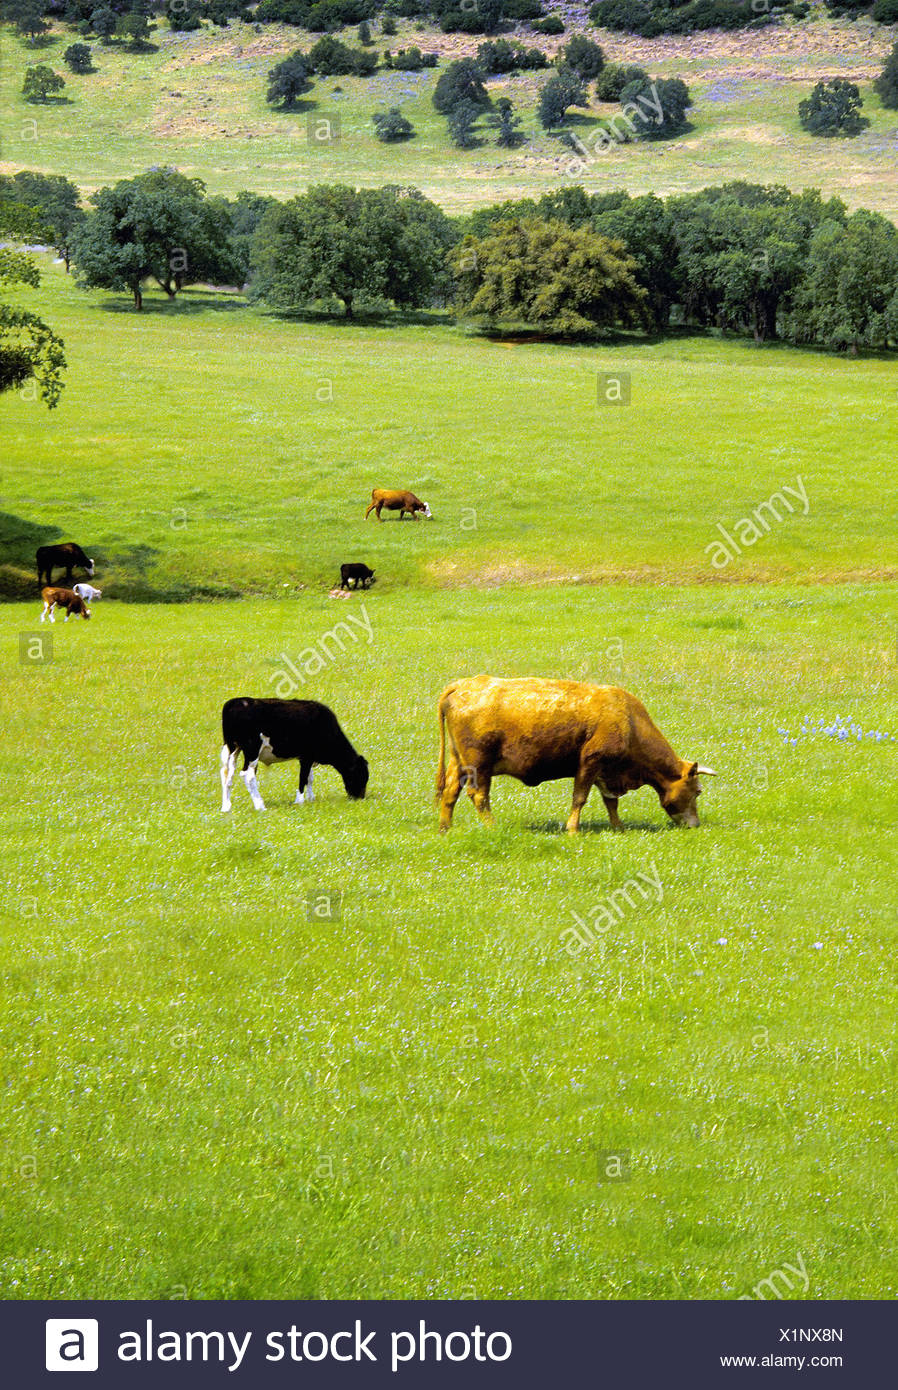 Cows Yellow And Black Grazing In Pastoral Looking Grassy Field